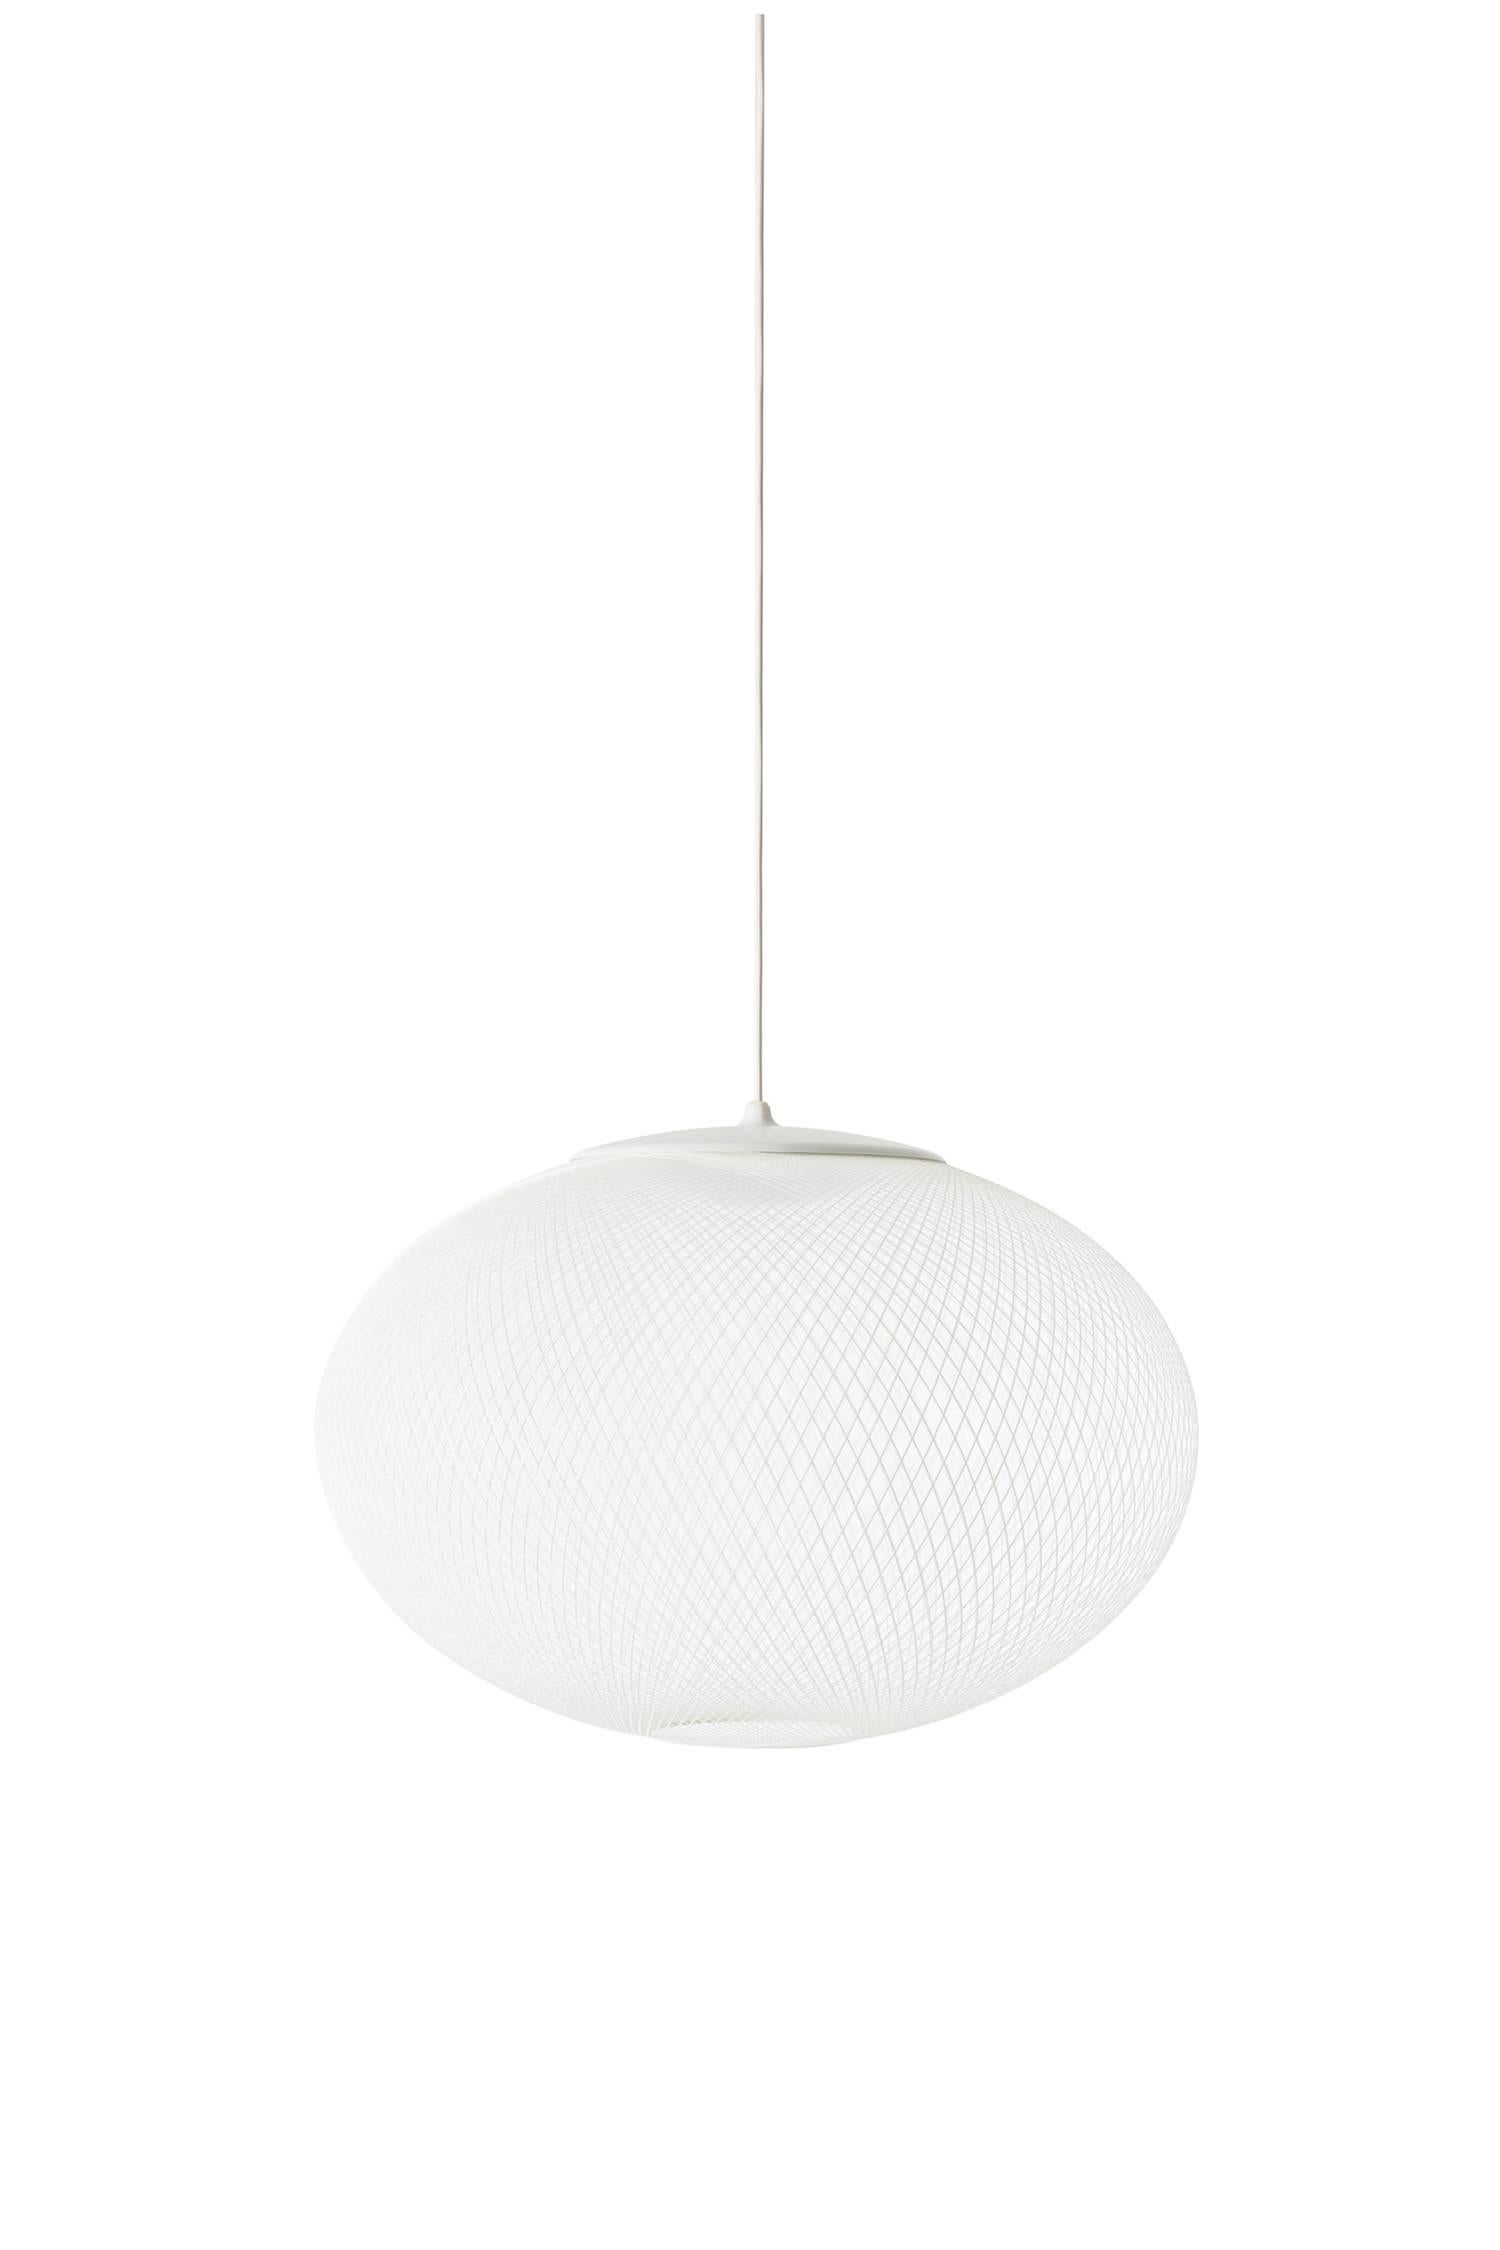 NR2 Medium White Suspension Lamp with Integrated LED by Bertjan Pot for Moooi For Sale 5